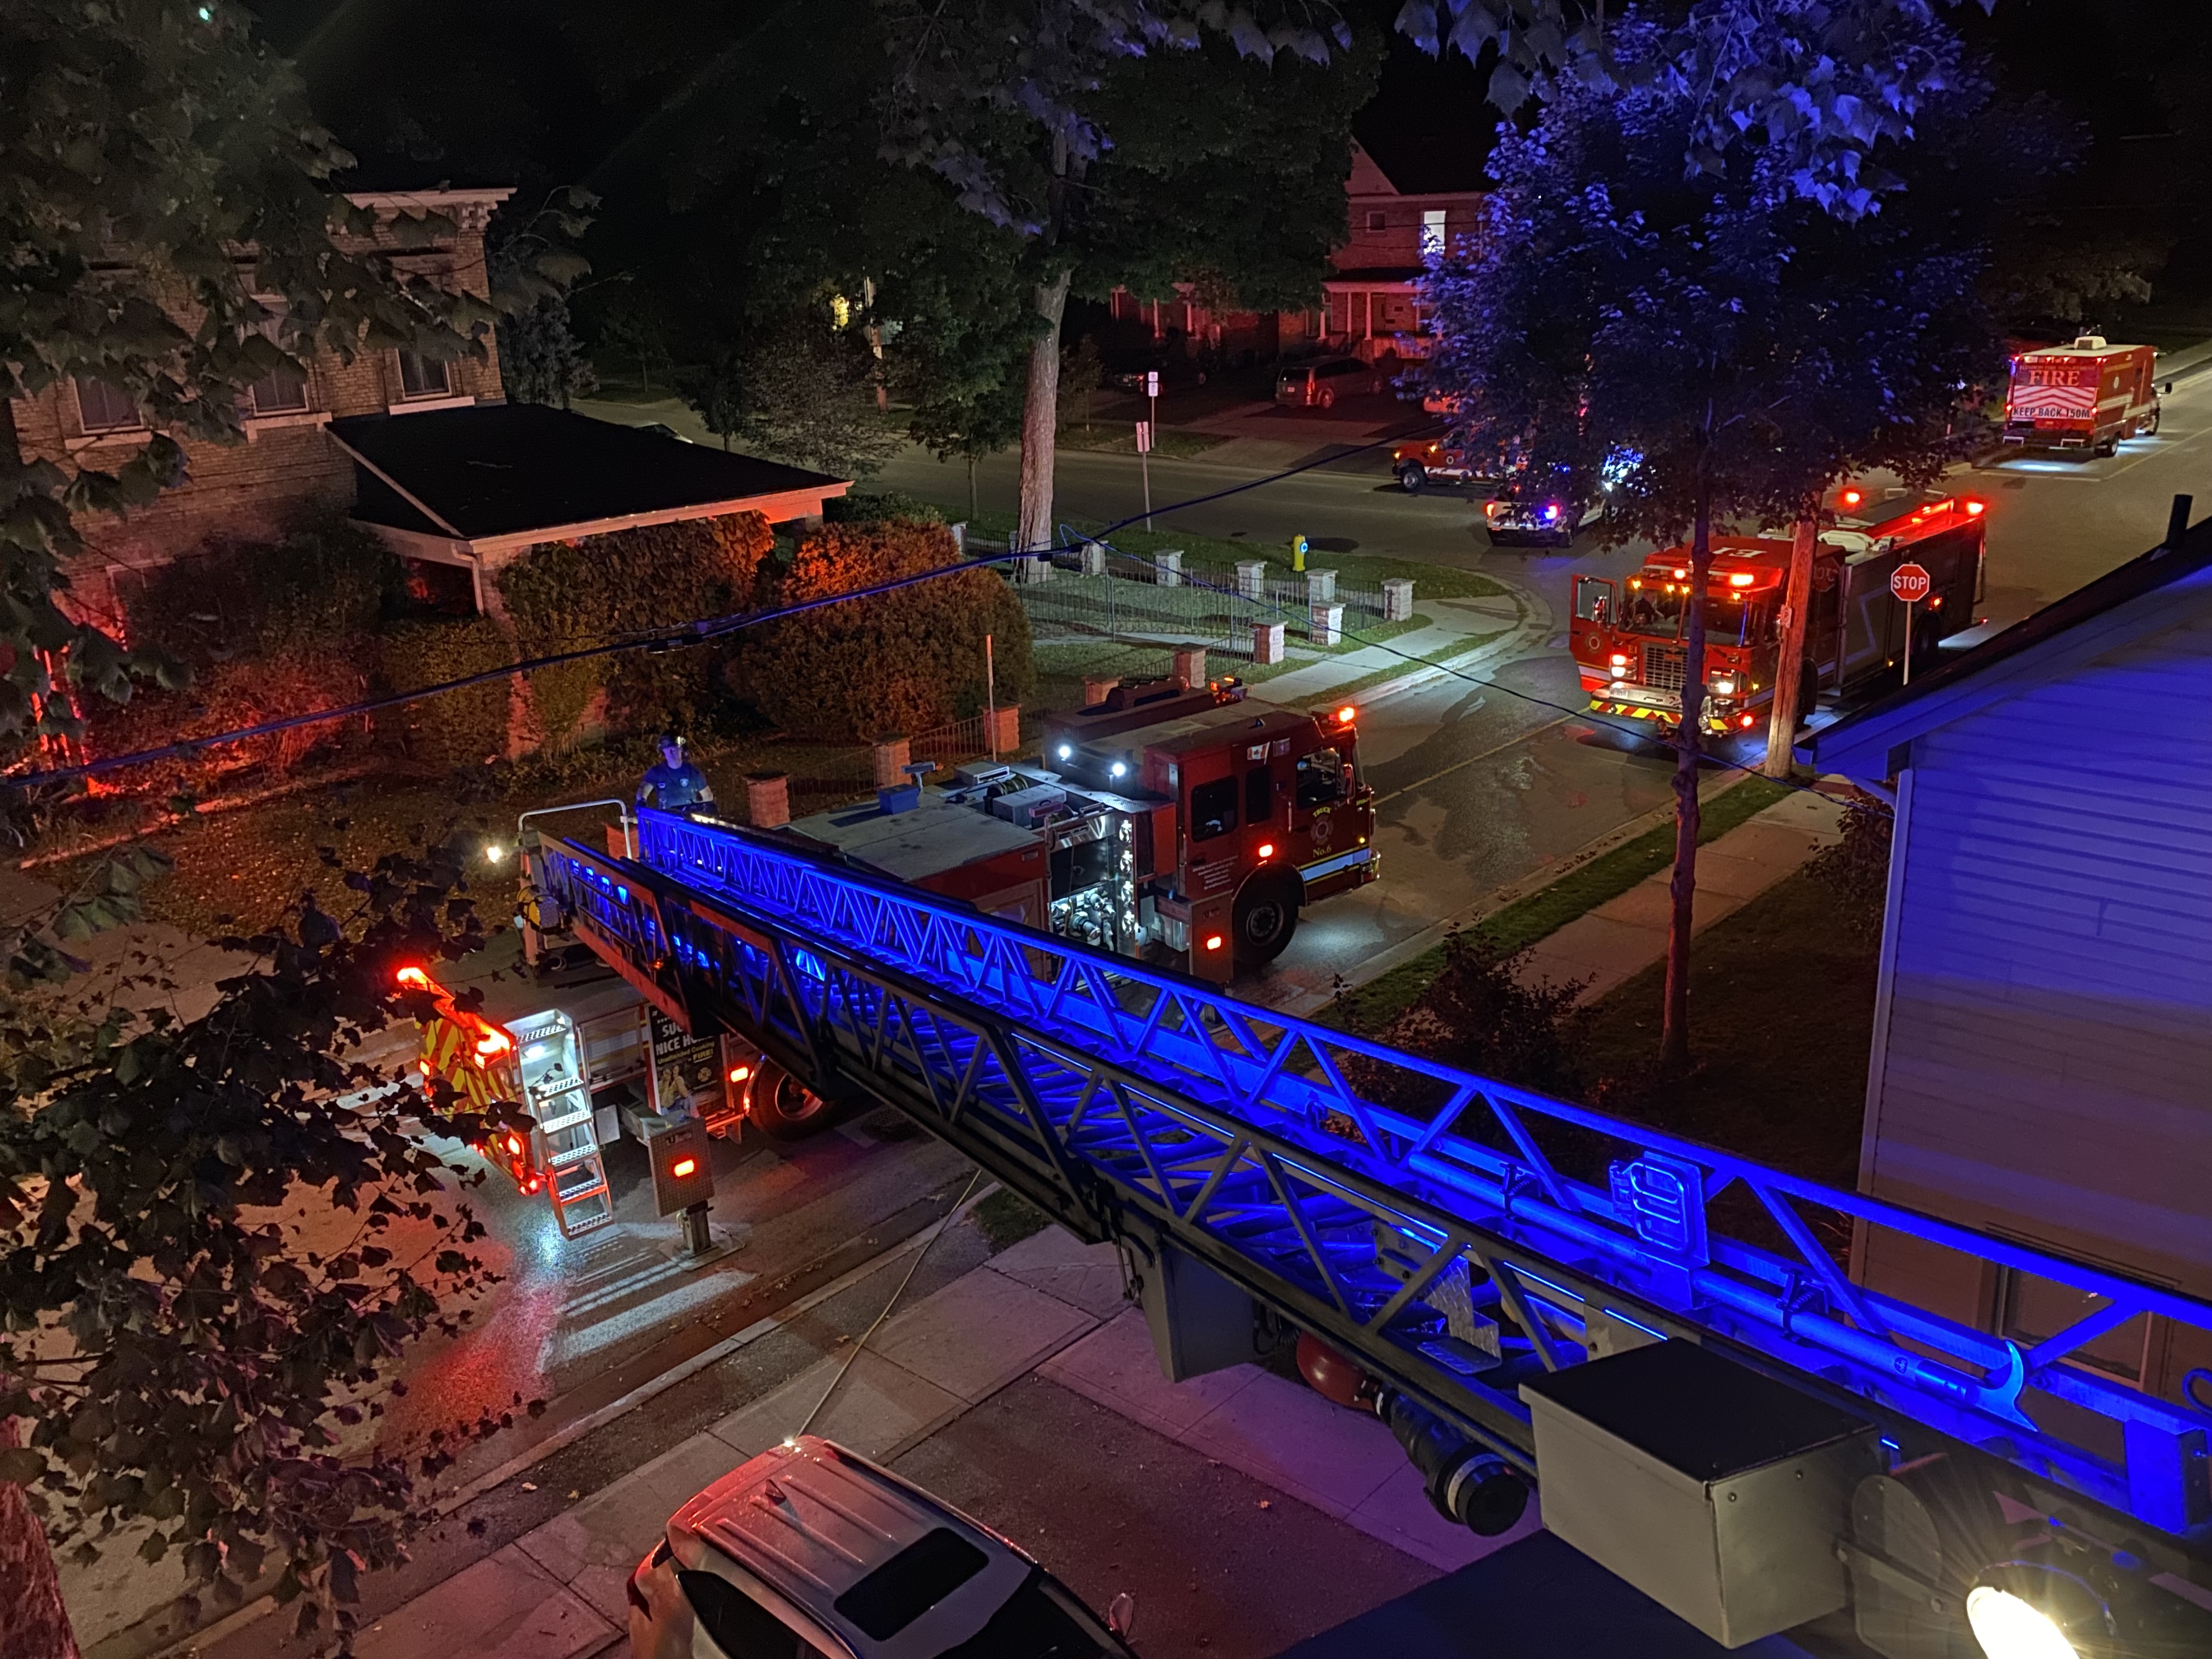 Fire truck at night with ladder extended